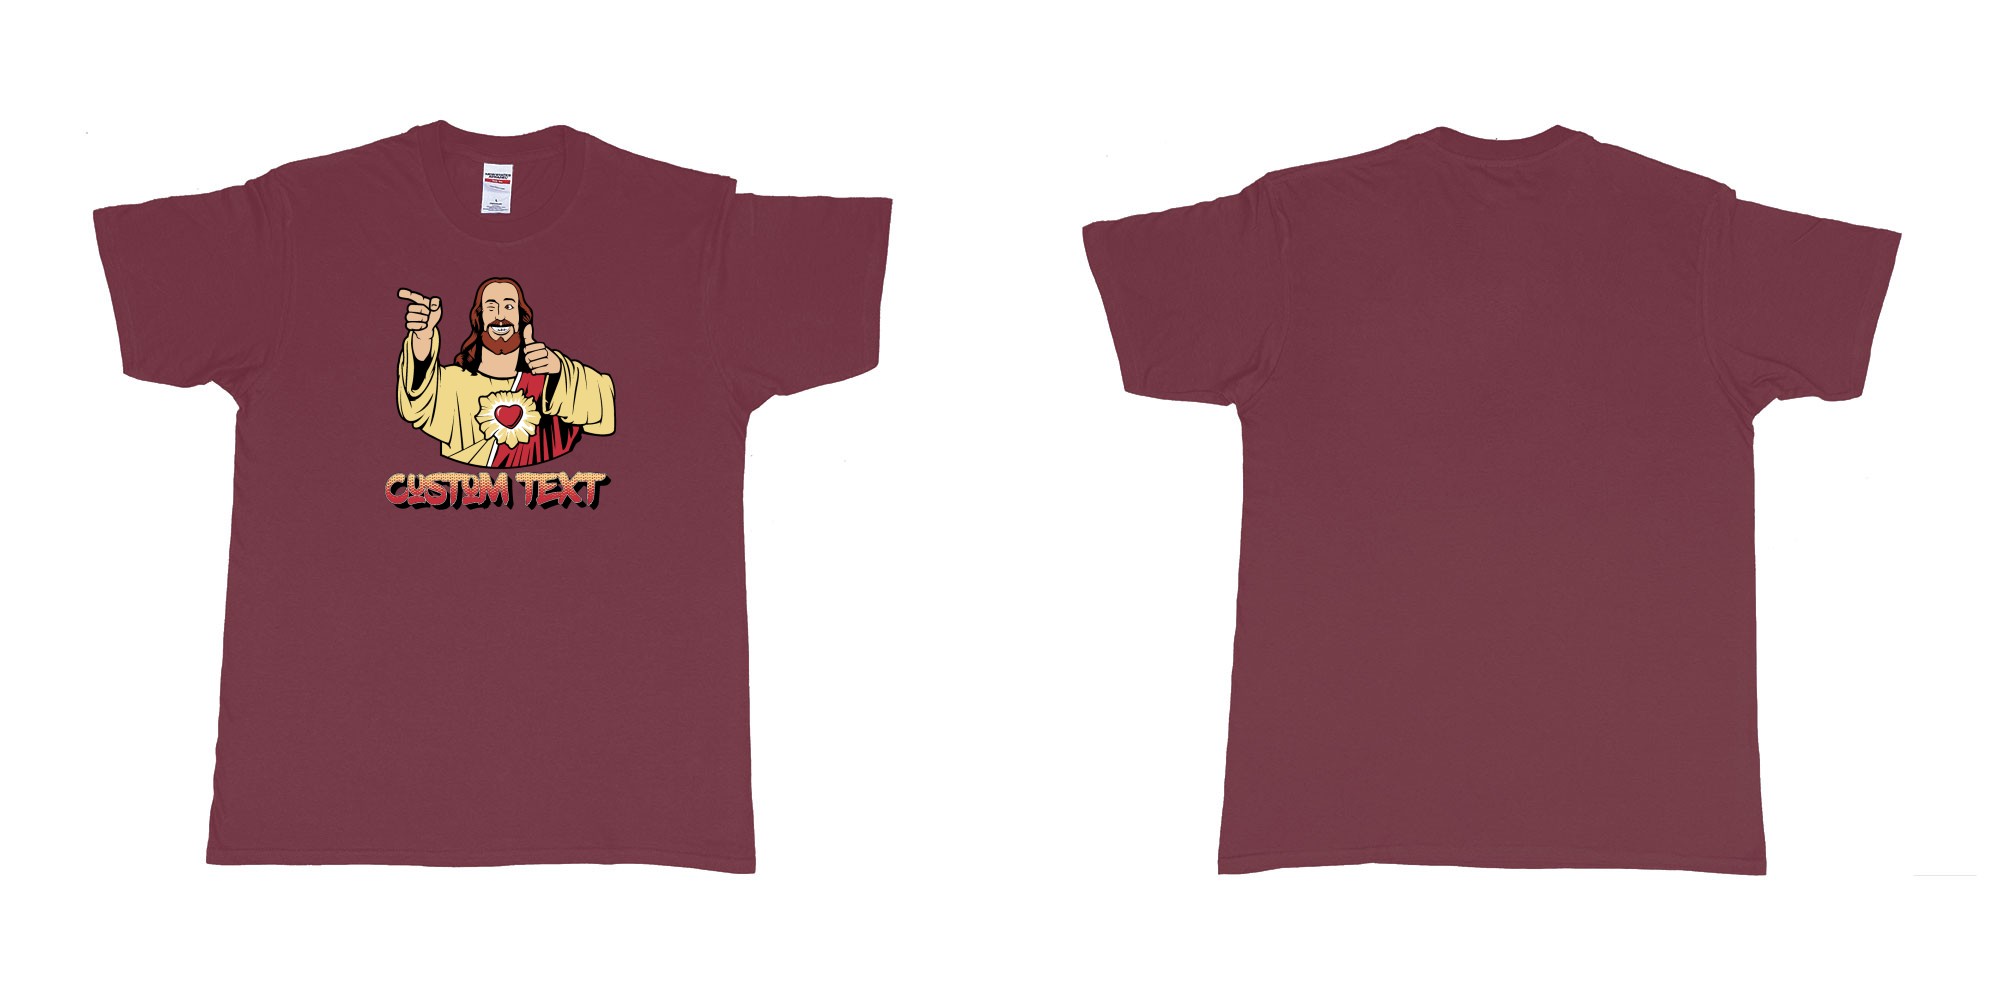 Custom tshirt design buddy christ custom text in fabric color marron choice your own text made in Bali by The Pirate Way